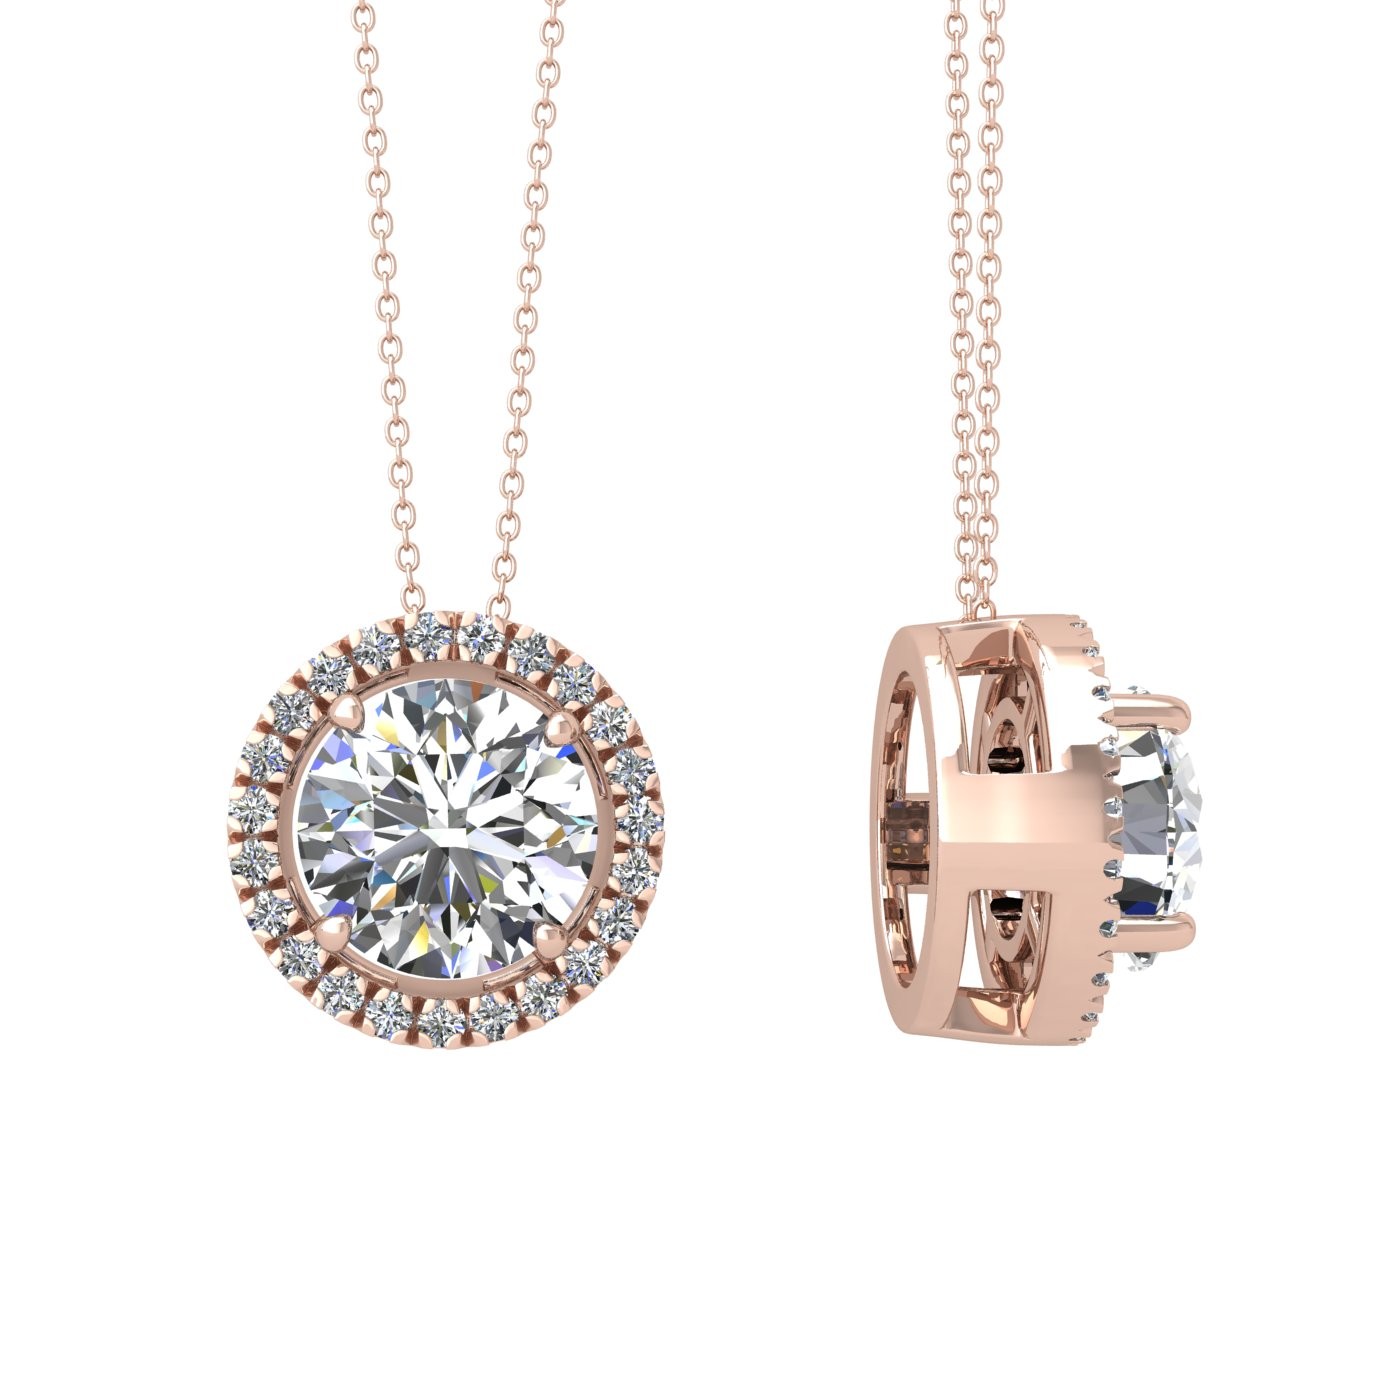 18k rose gold  0,7 ct 4 prong round shape diamond pendant with diamond pavÉ set halo including chain seperate from the pendant